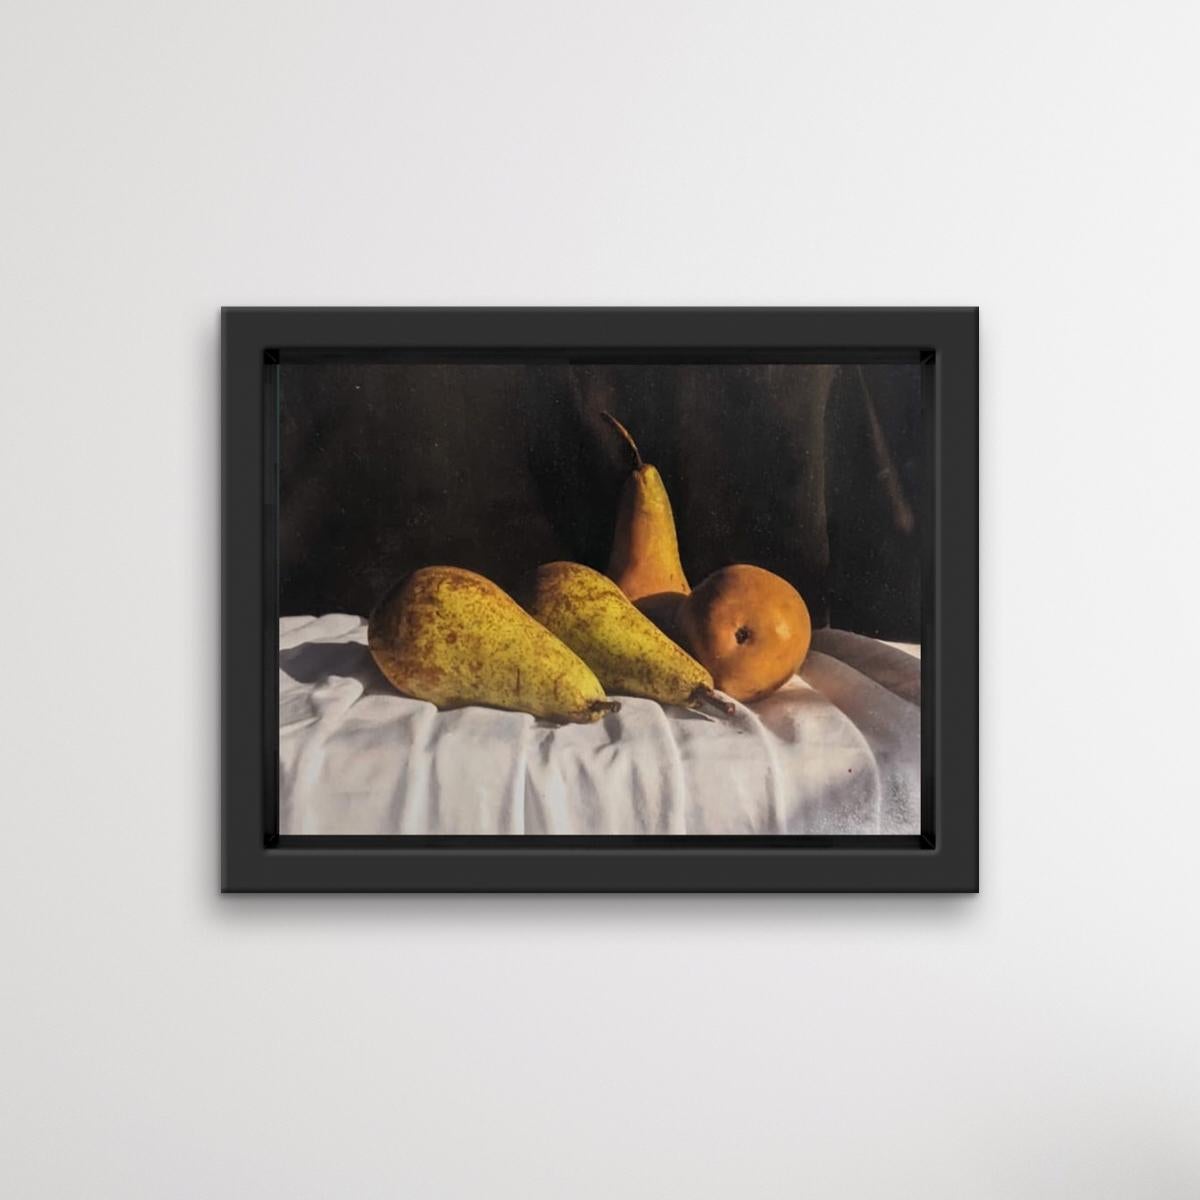 Conference Pears, Kate Verrion, Still life painting, Oil painting, 2022 2